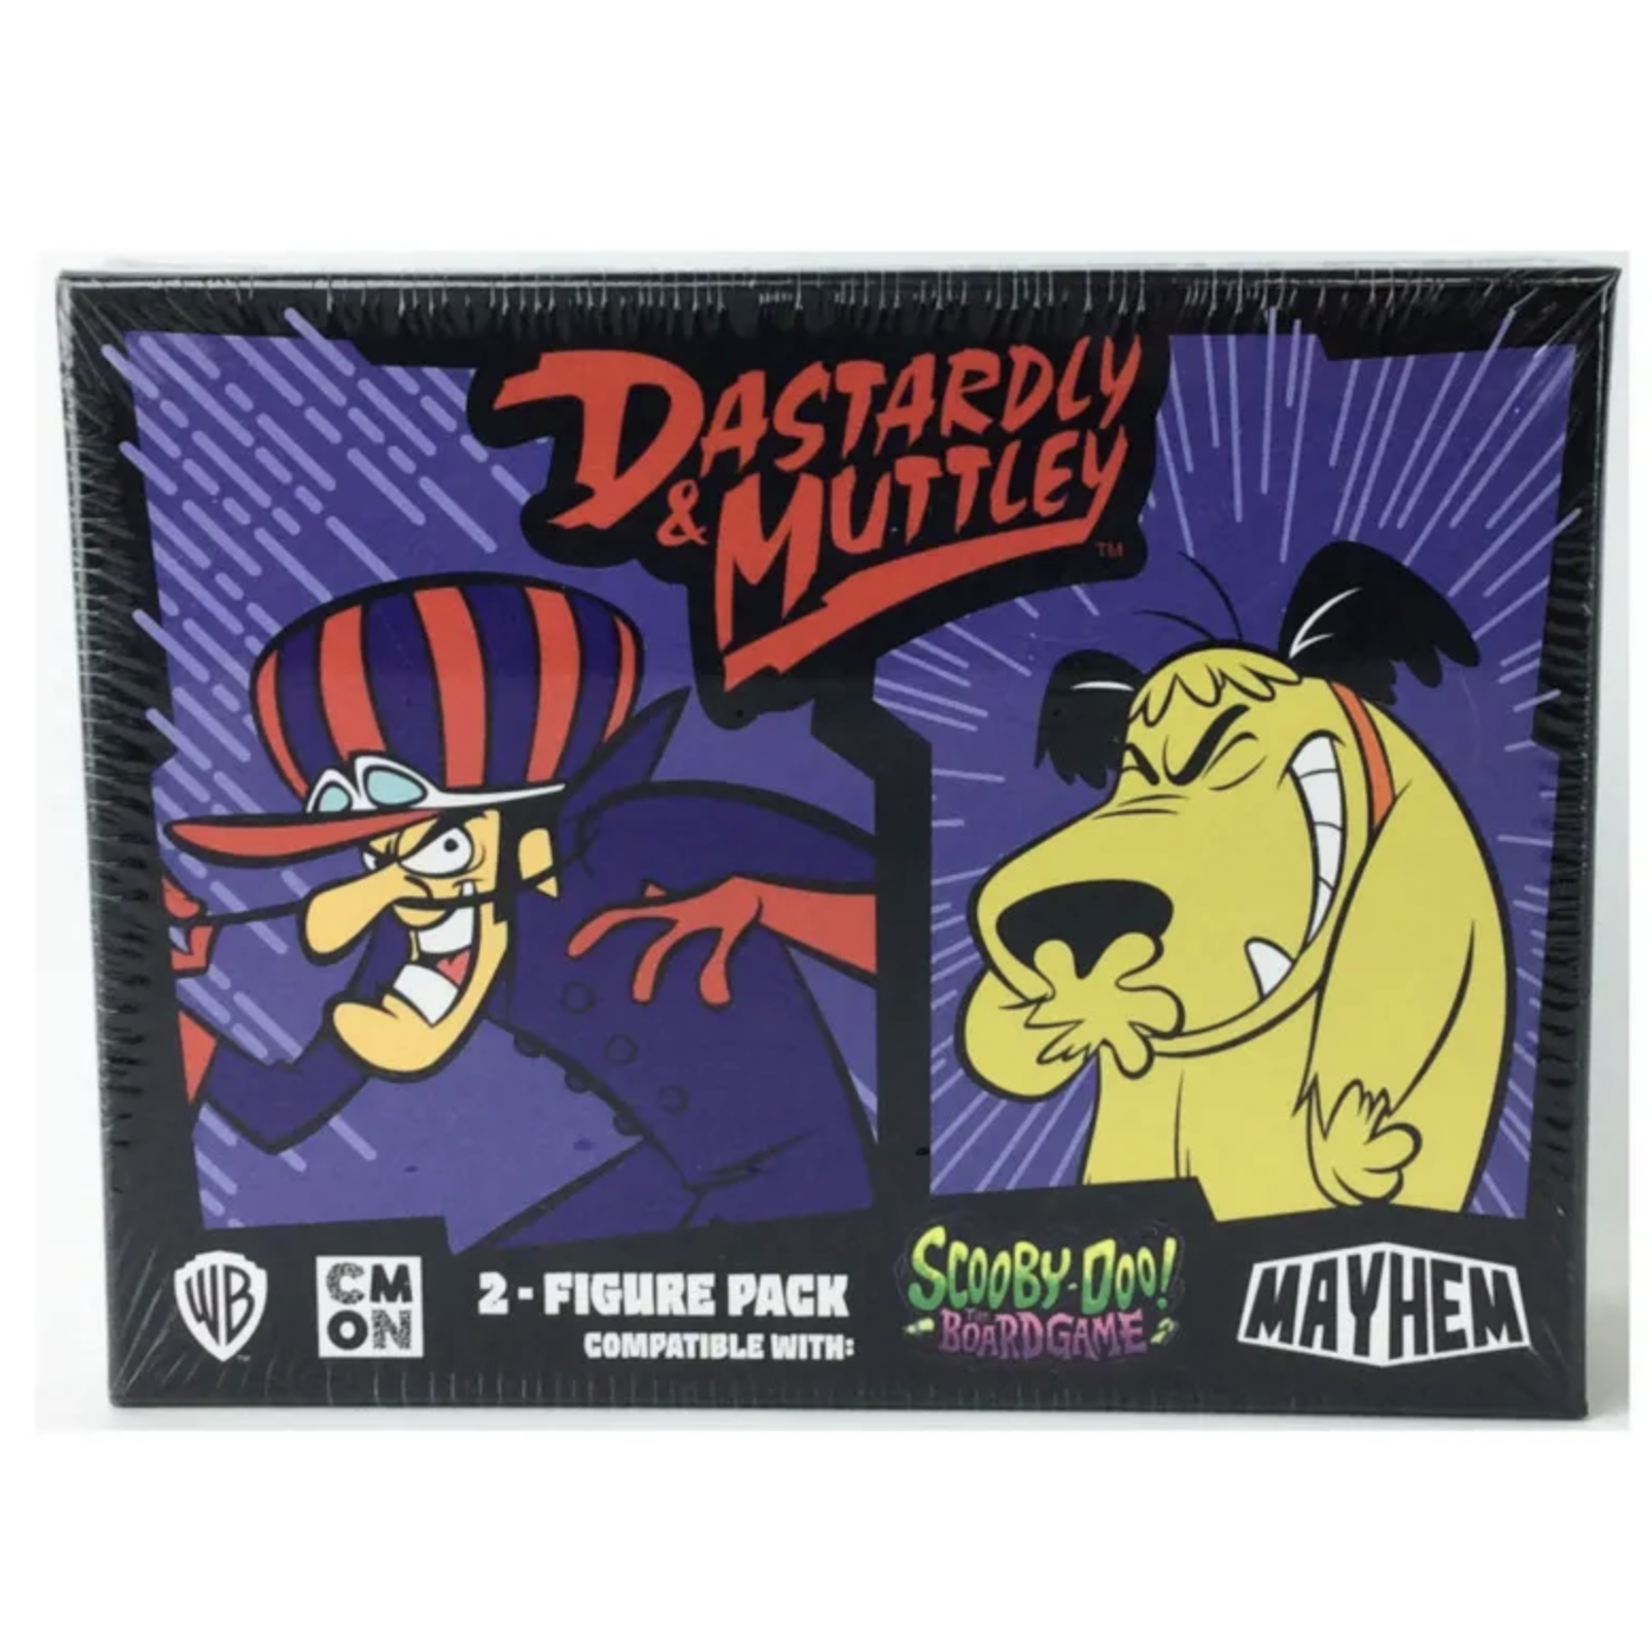 CMON Dastardly & Muttley 2-Figure Pack (Expansion)